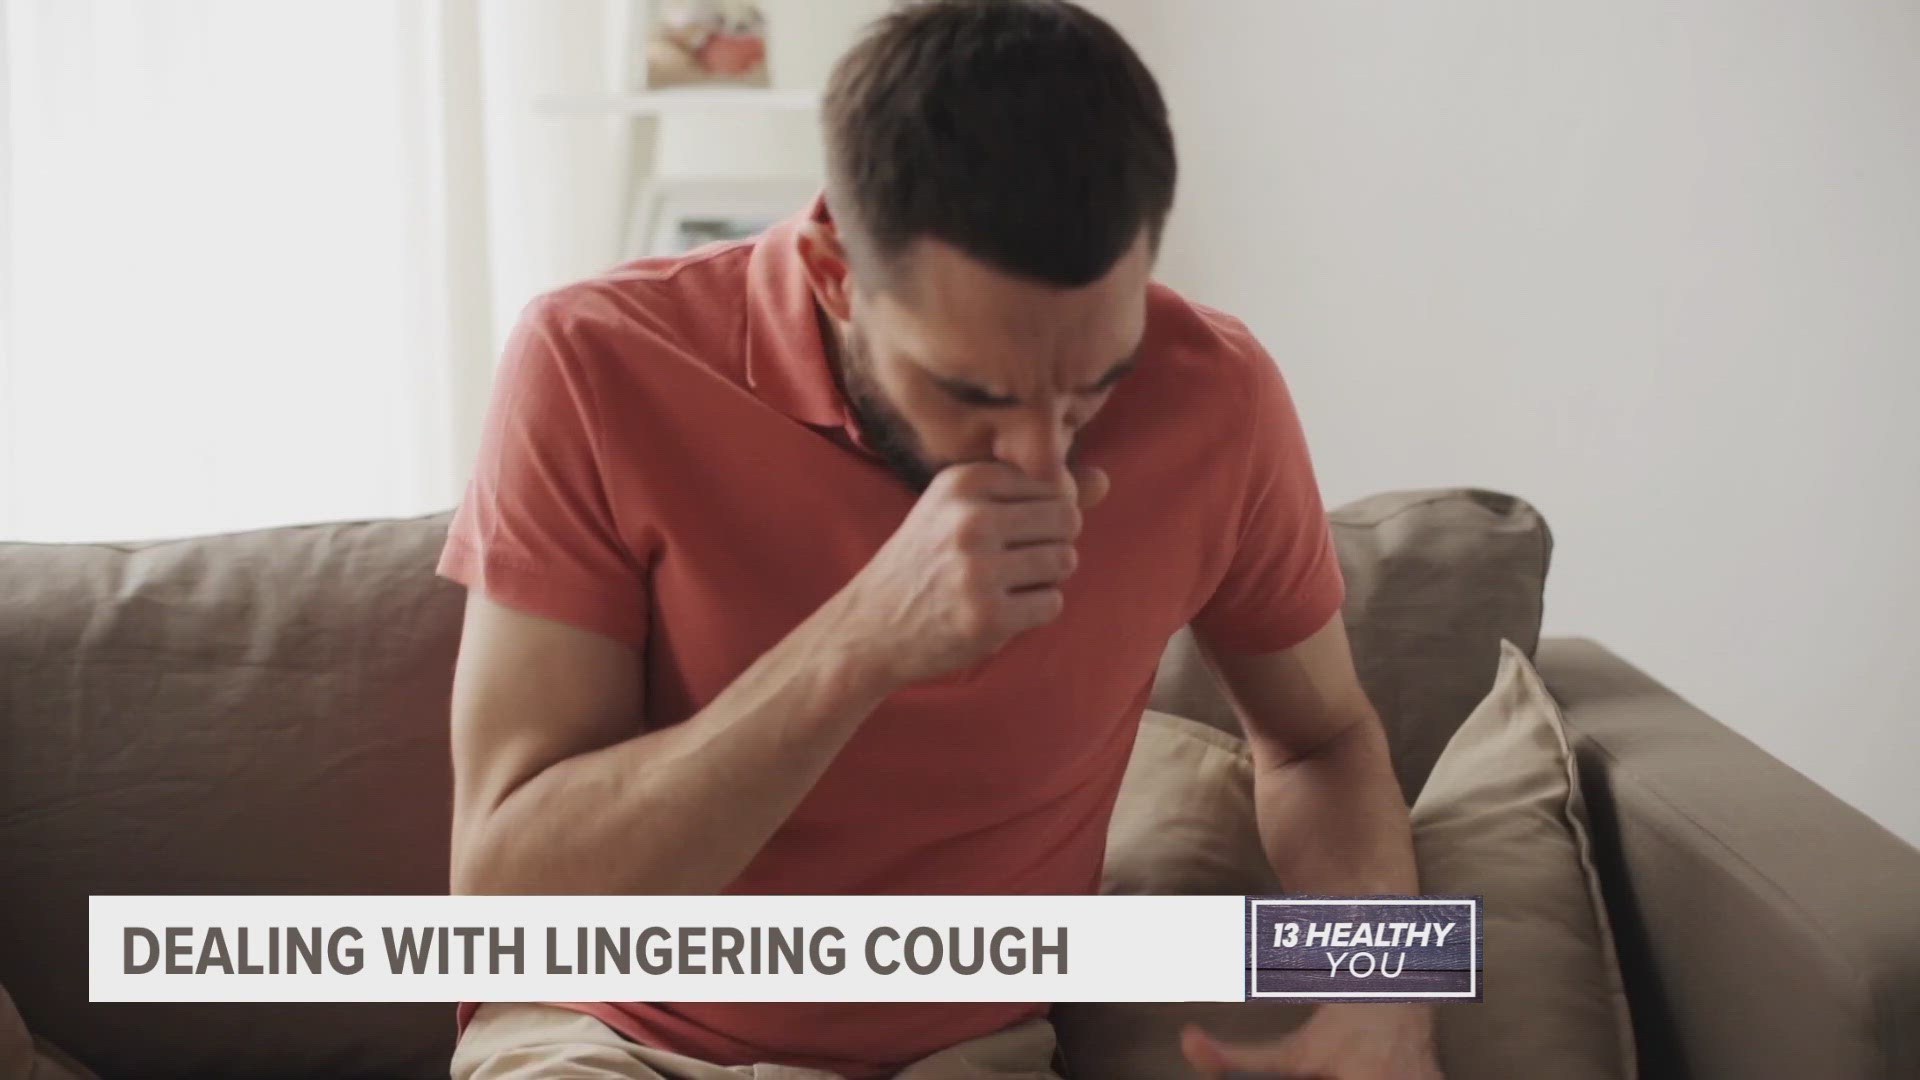 13 ON YOUR SIDE spoke to the experts for advice on what causes the cough, and how to get rid of it.